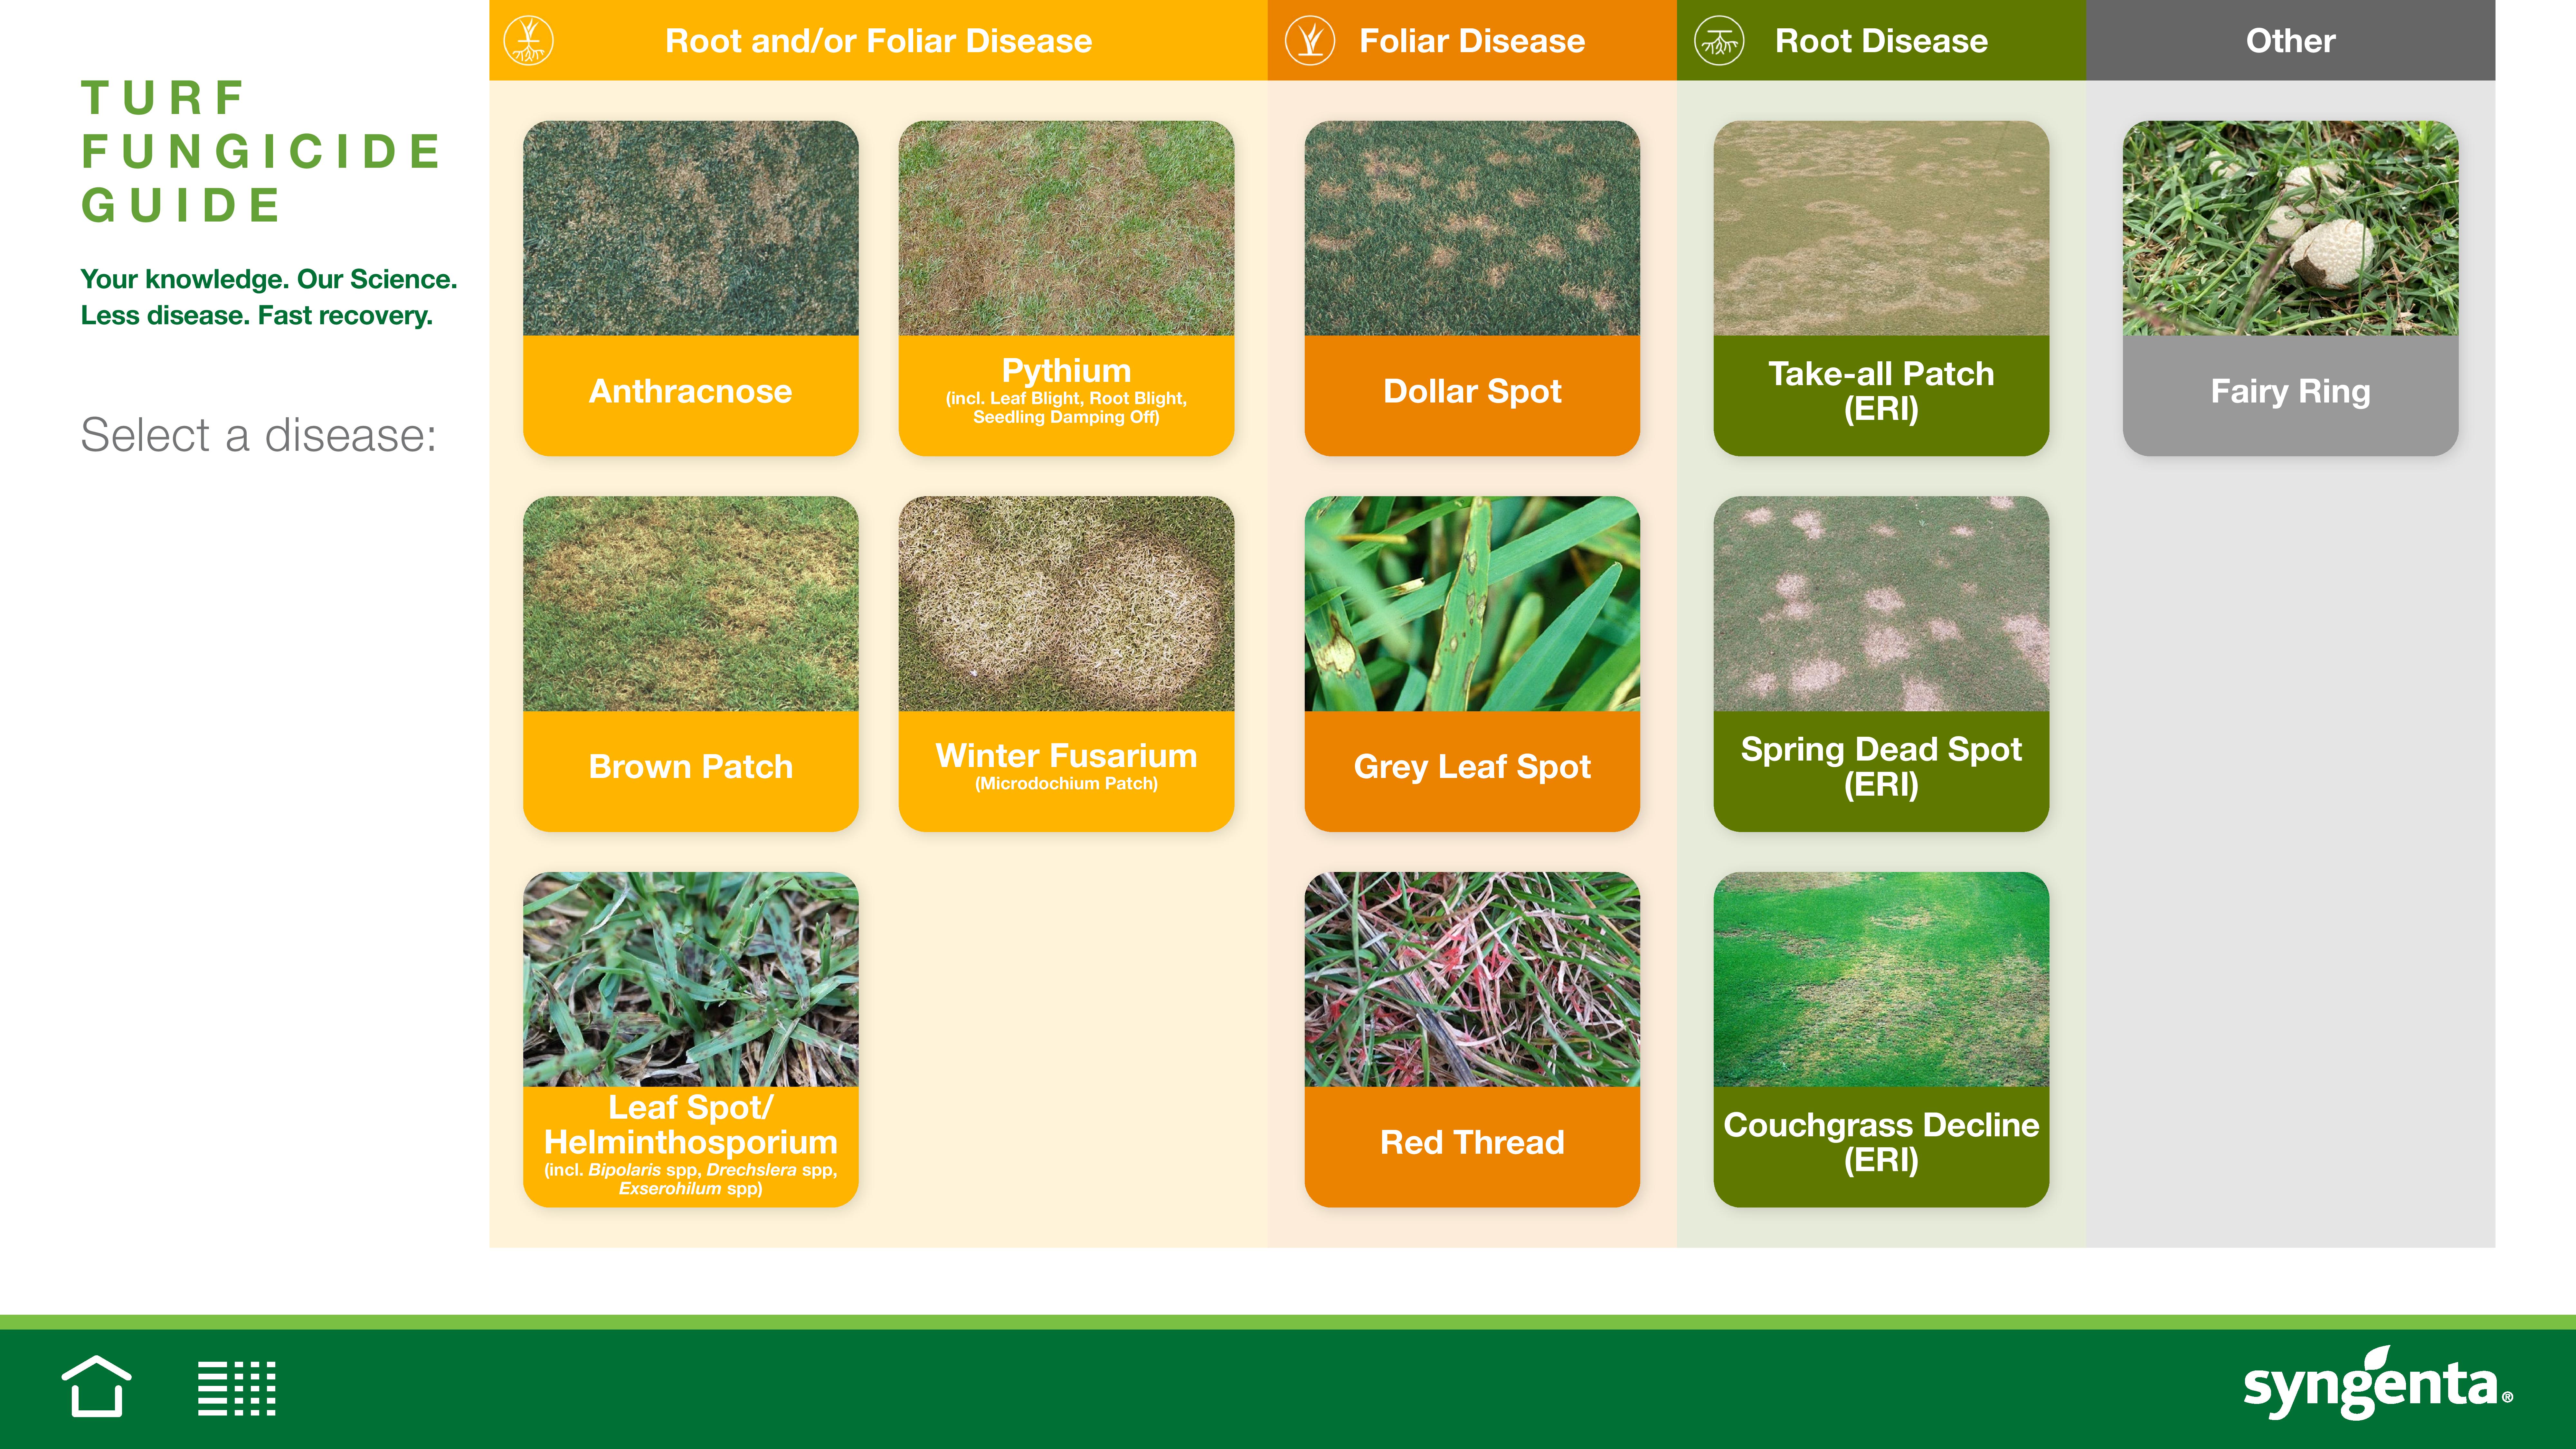 The Turf Disease Fungicide Guide